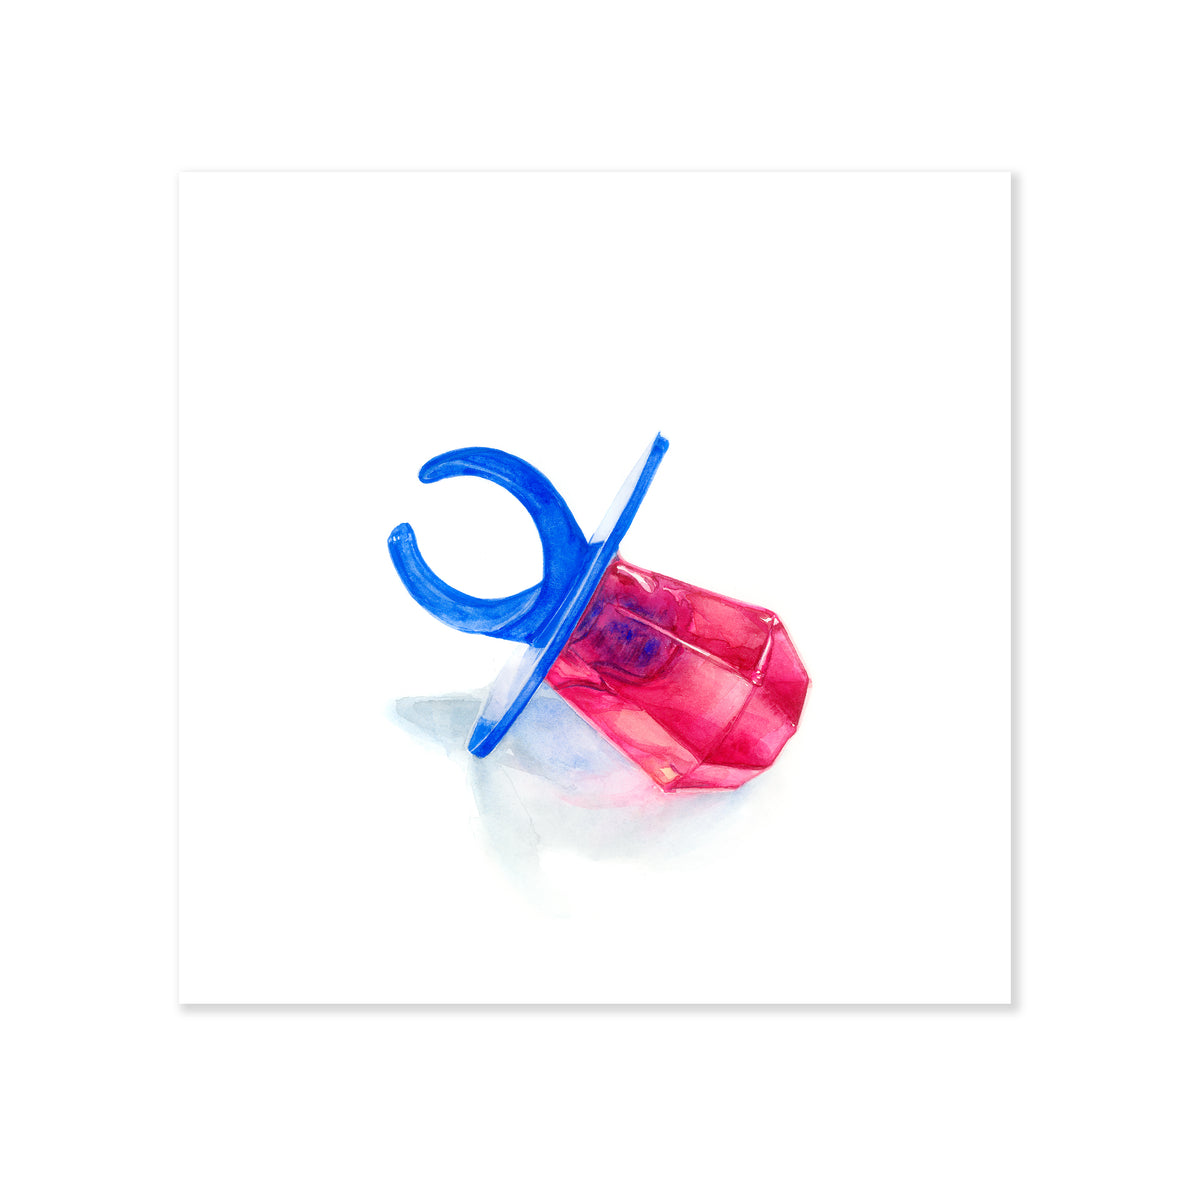 A fine art print illustrating a red ring pop candy on a blue ring painted with watercolors on a soft white background